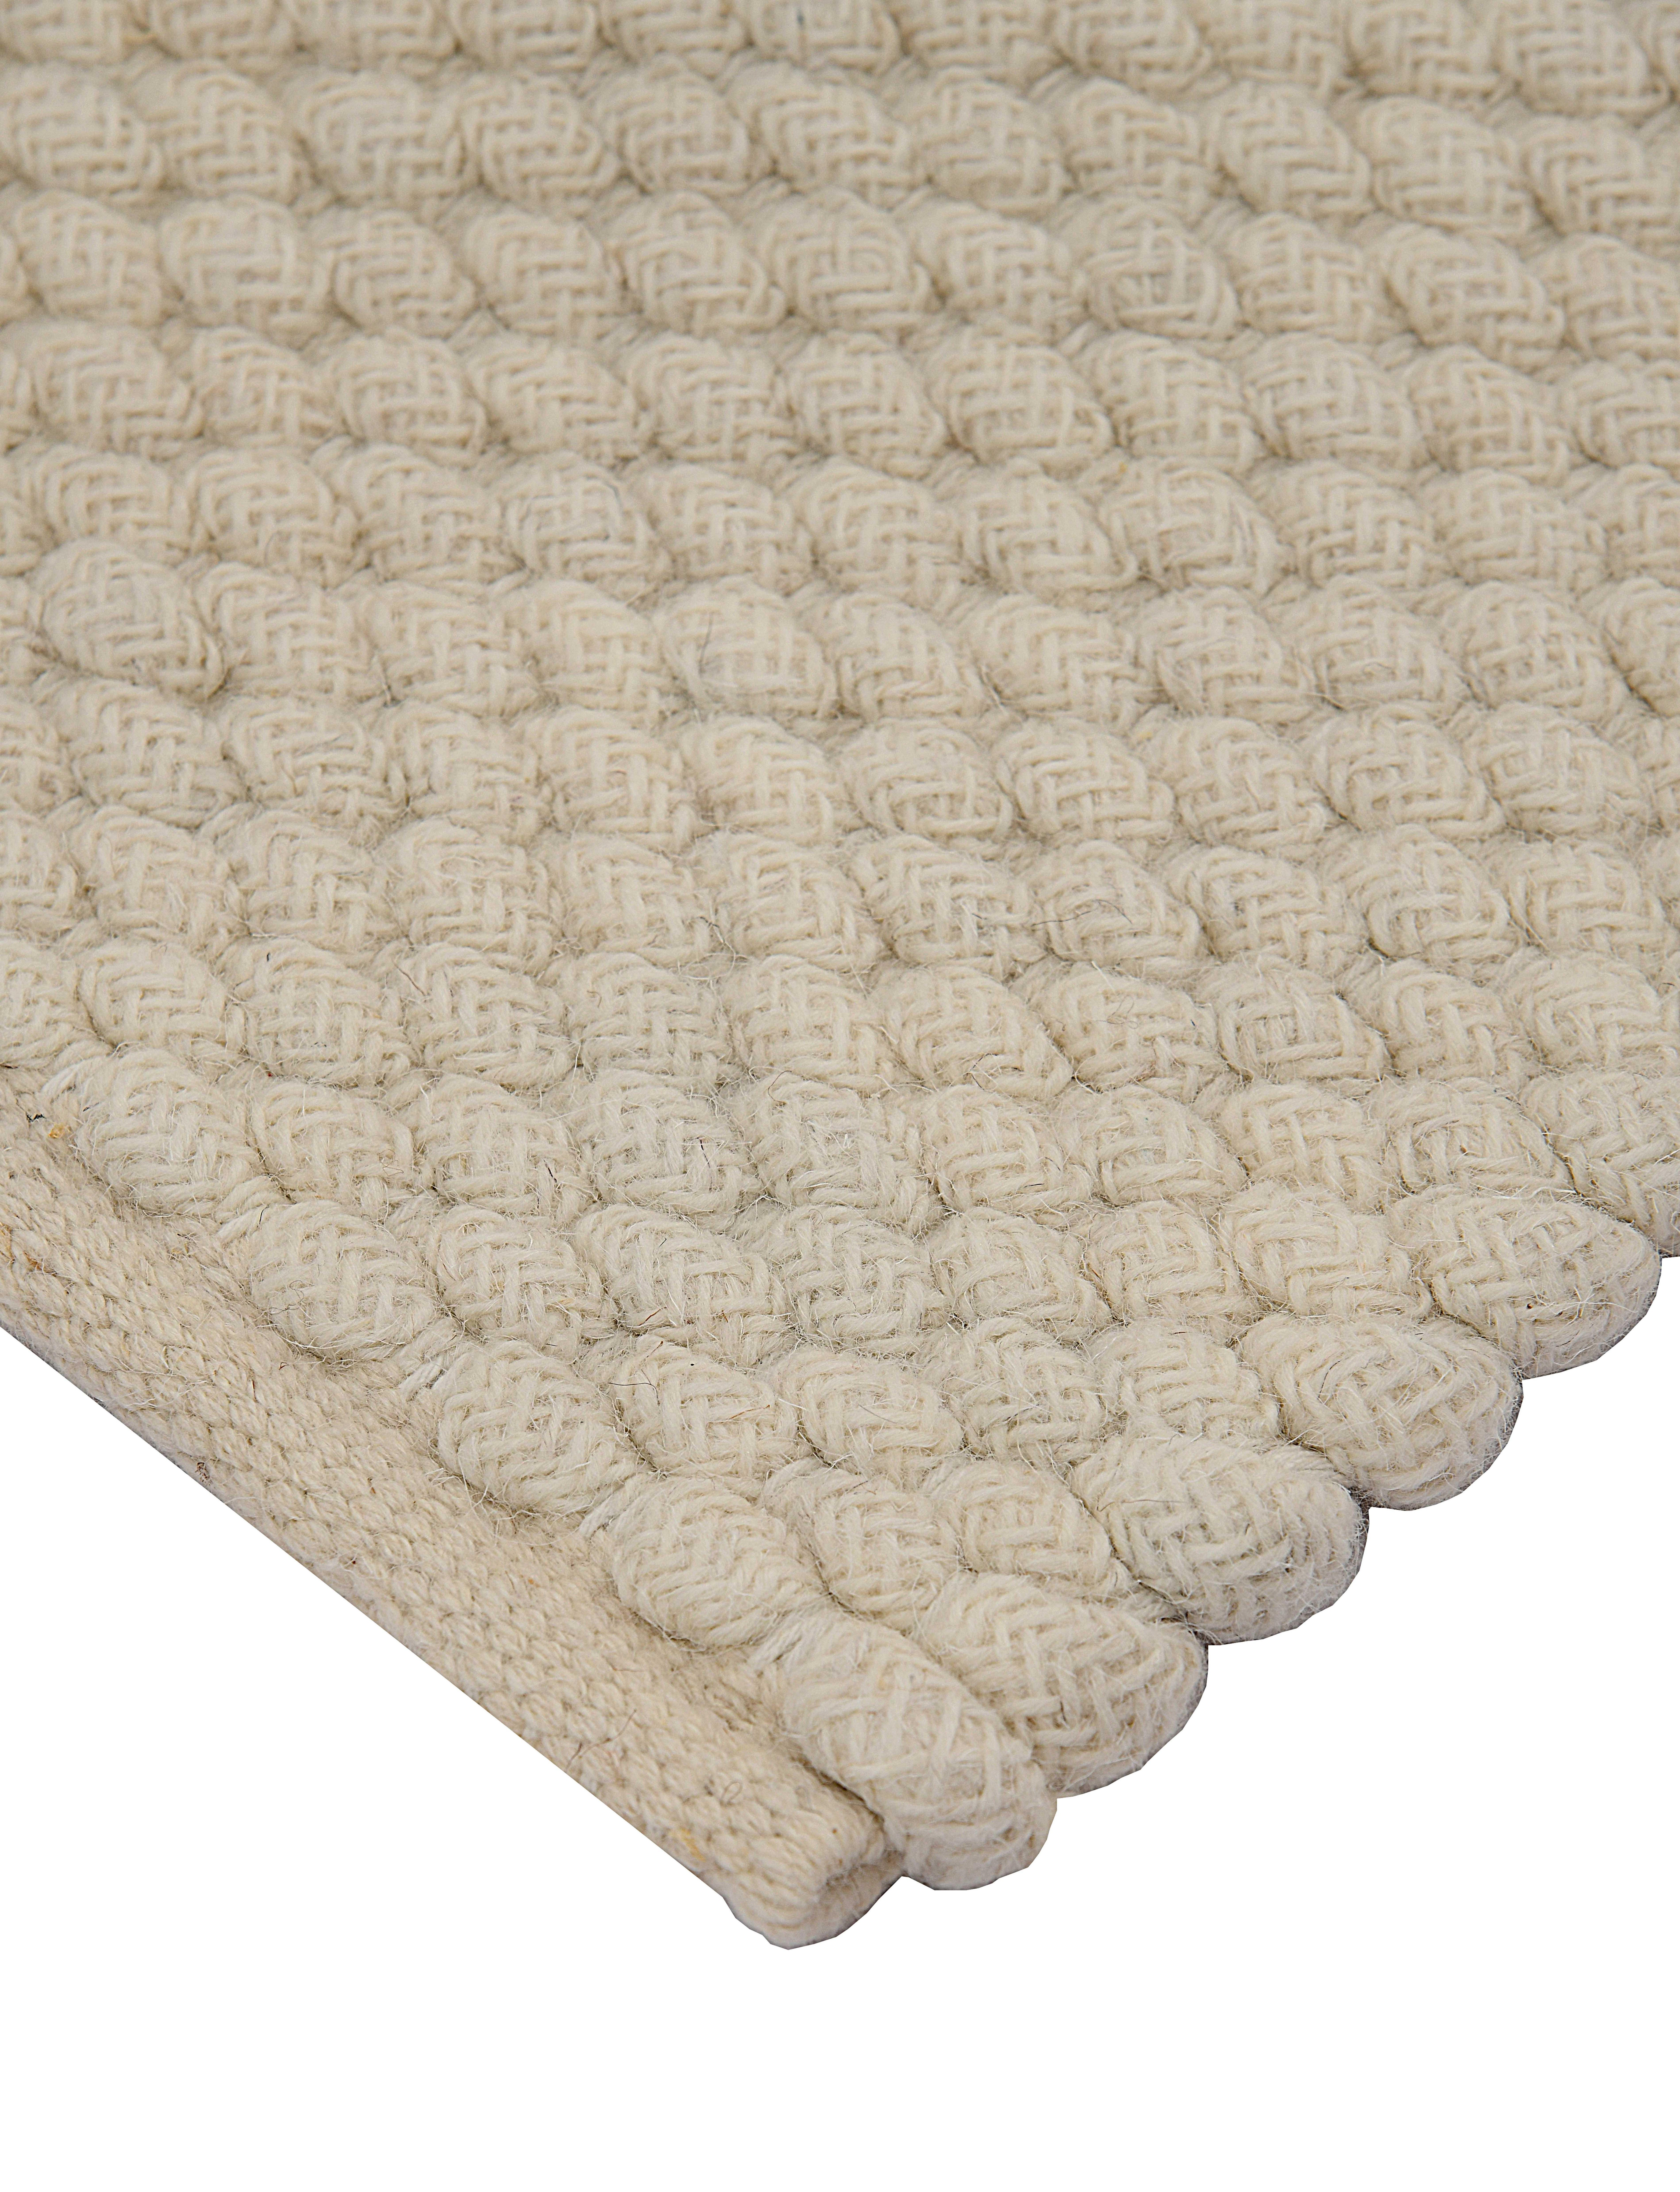 Indian Acia, Ivory, Handwoven Face: 60% Undyed NZ Wool, 40% Undyed MED Wool, 6' x 9' For Sale